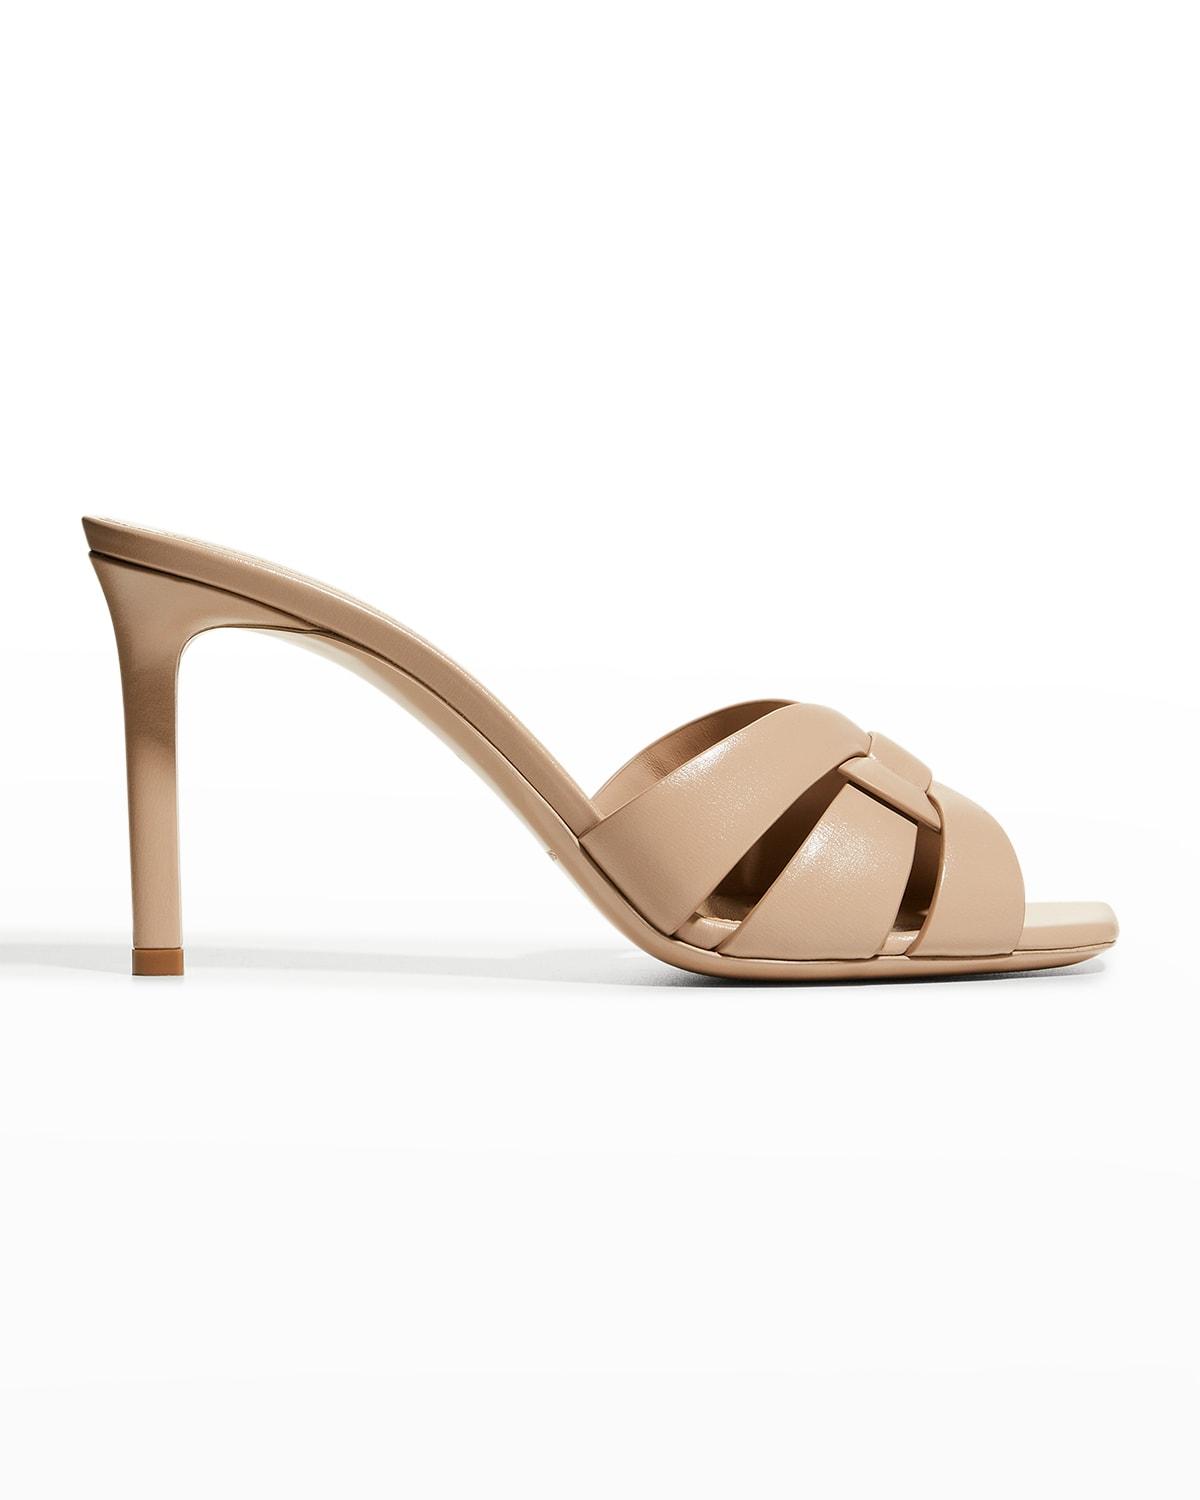 Saint Laurent Tribute Leather Slide Mules in Natural | Lyst